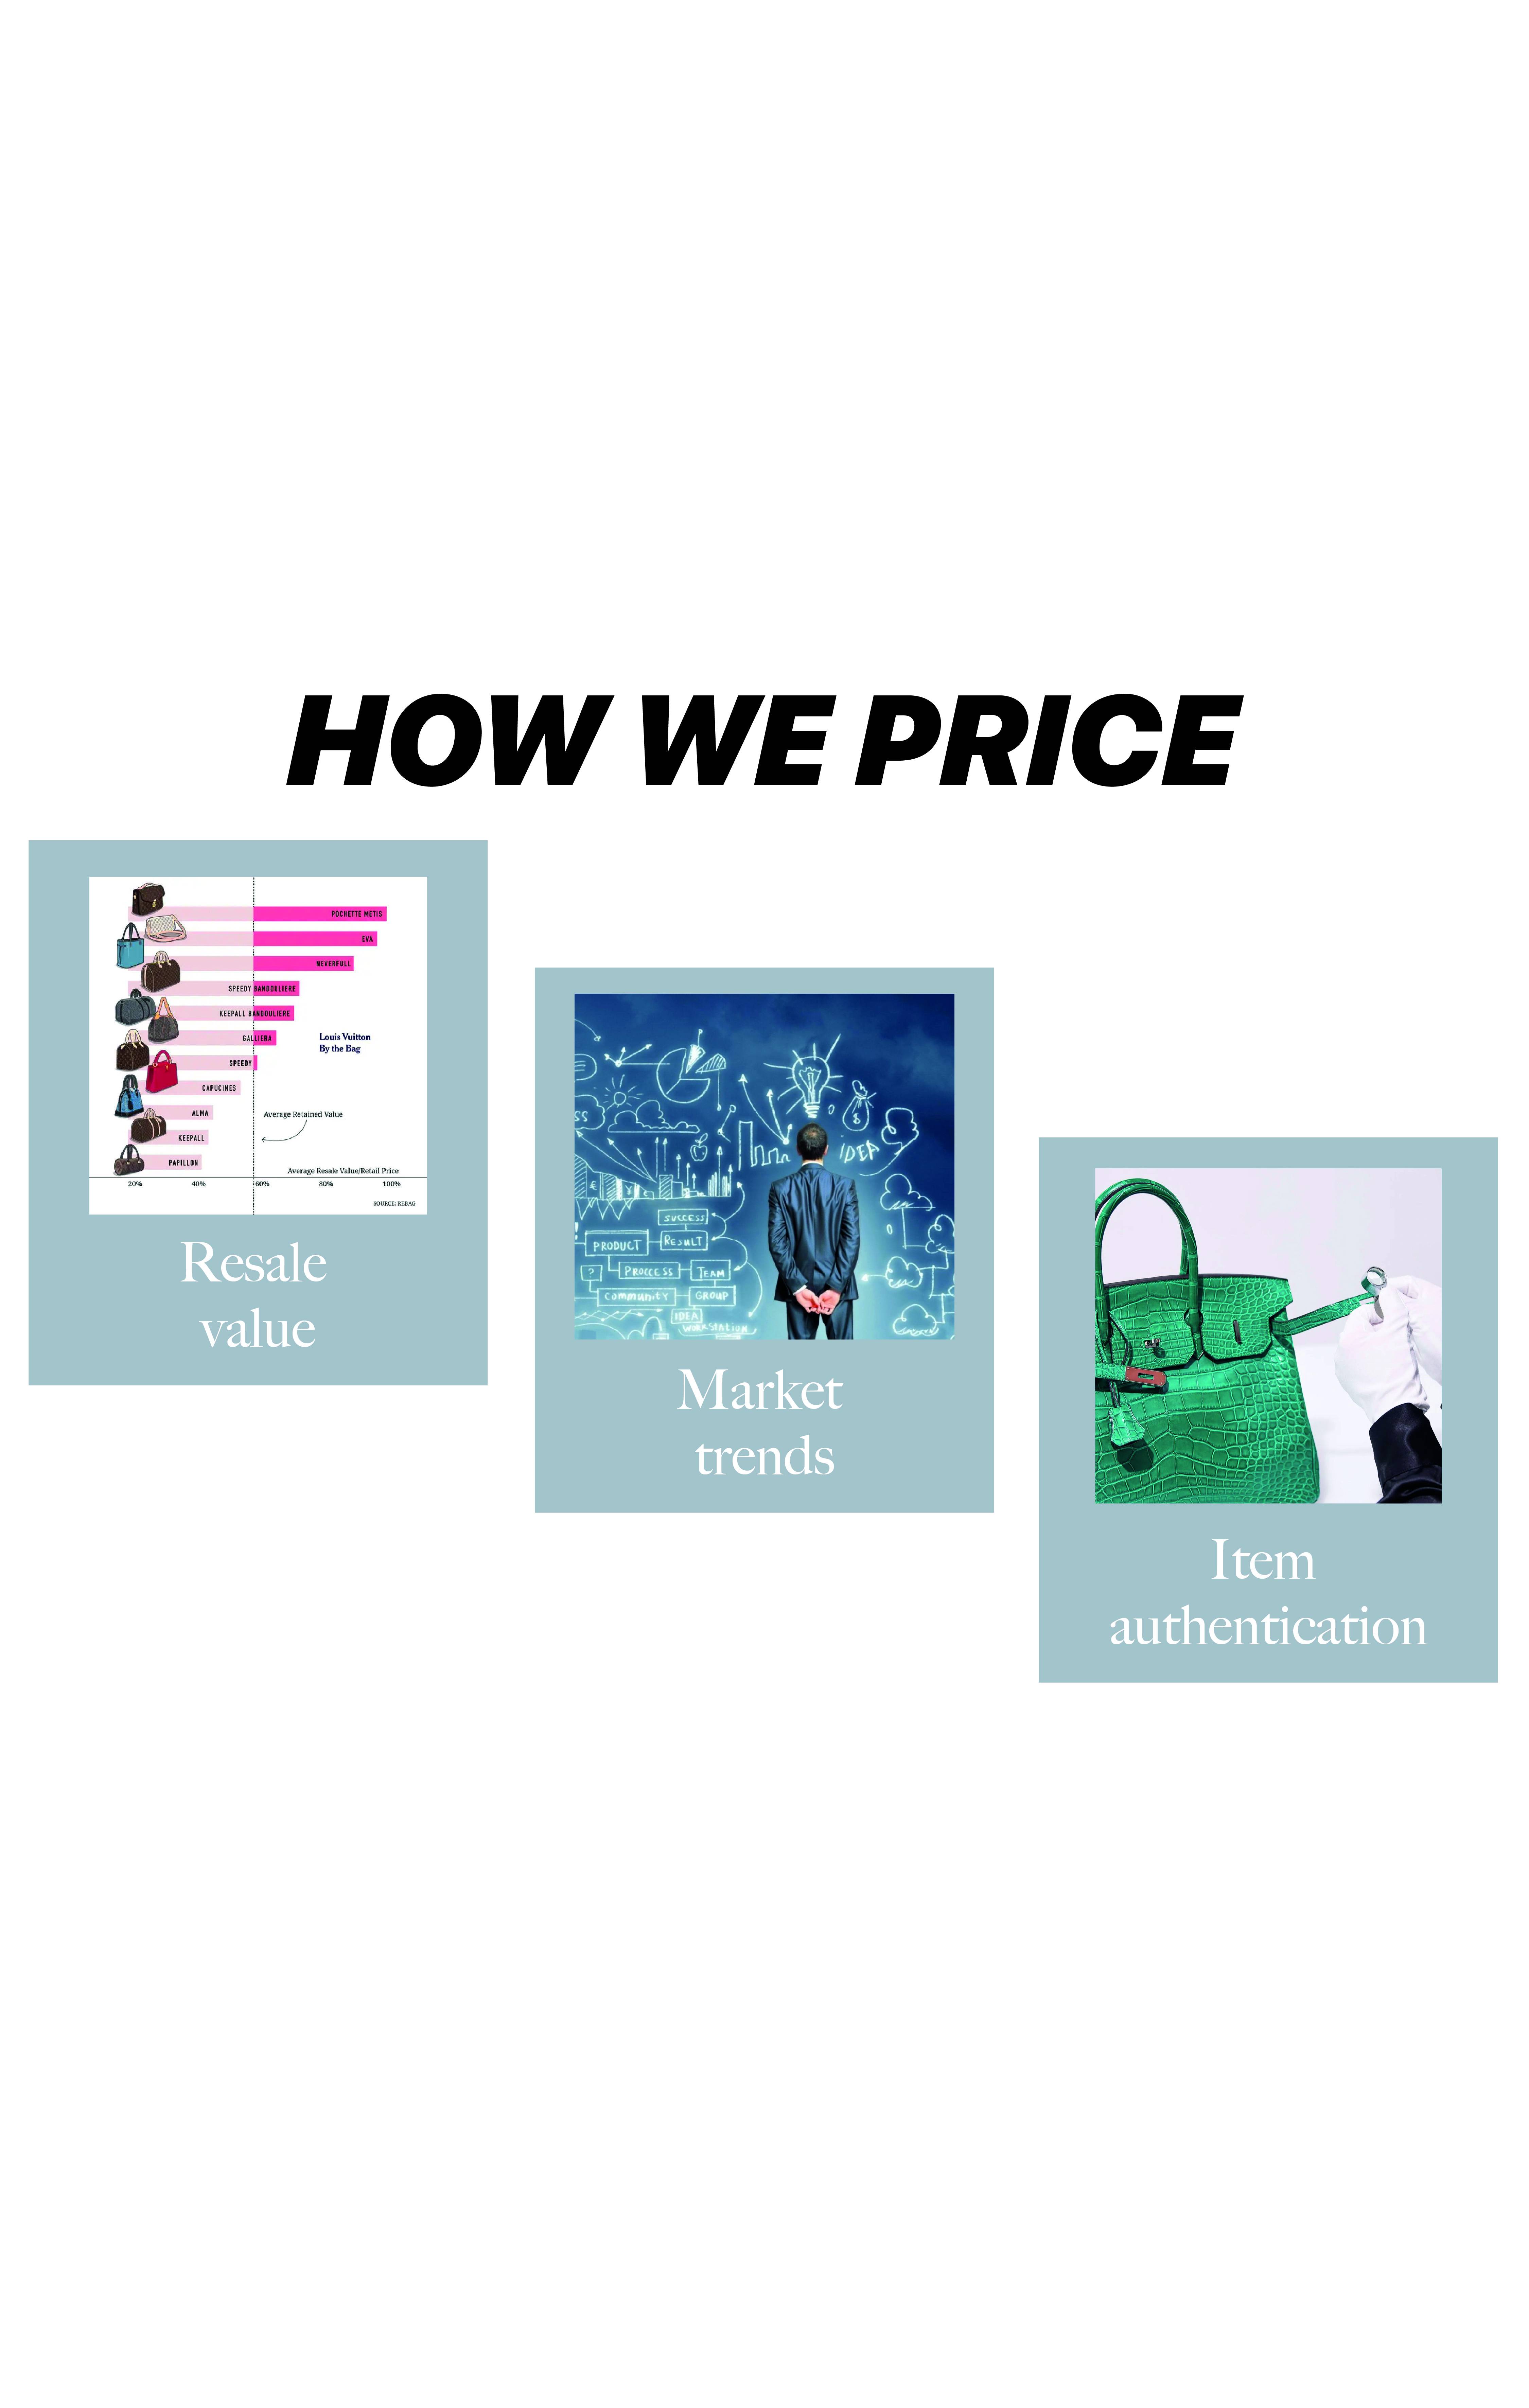 What factors influence our pricing?